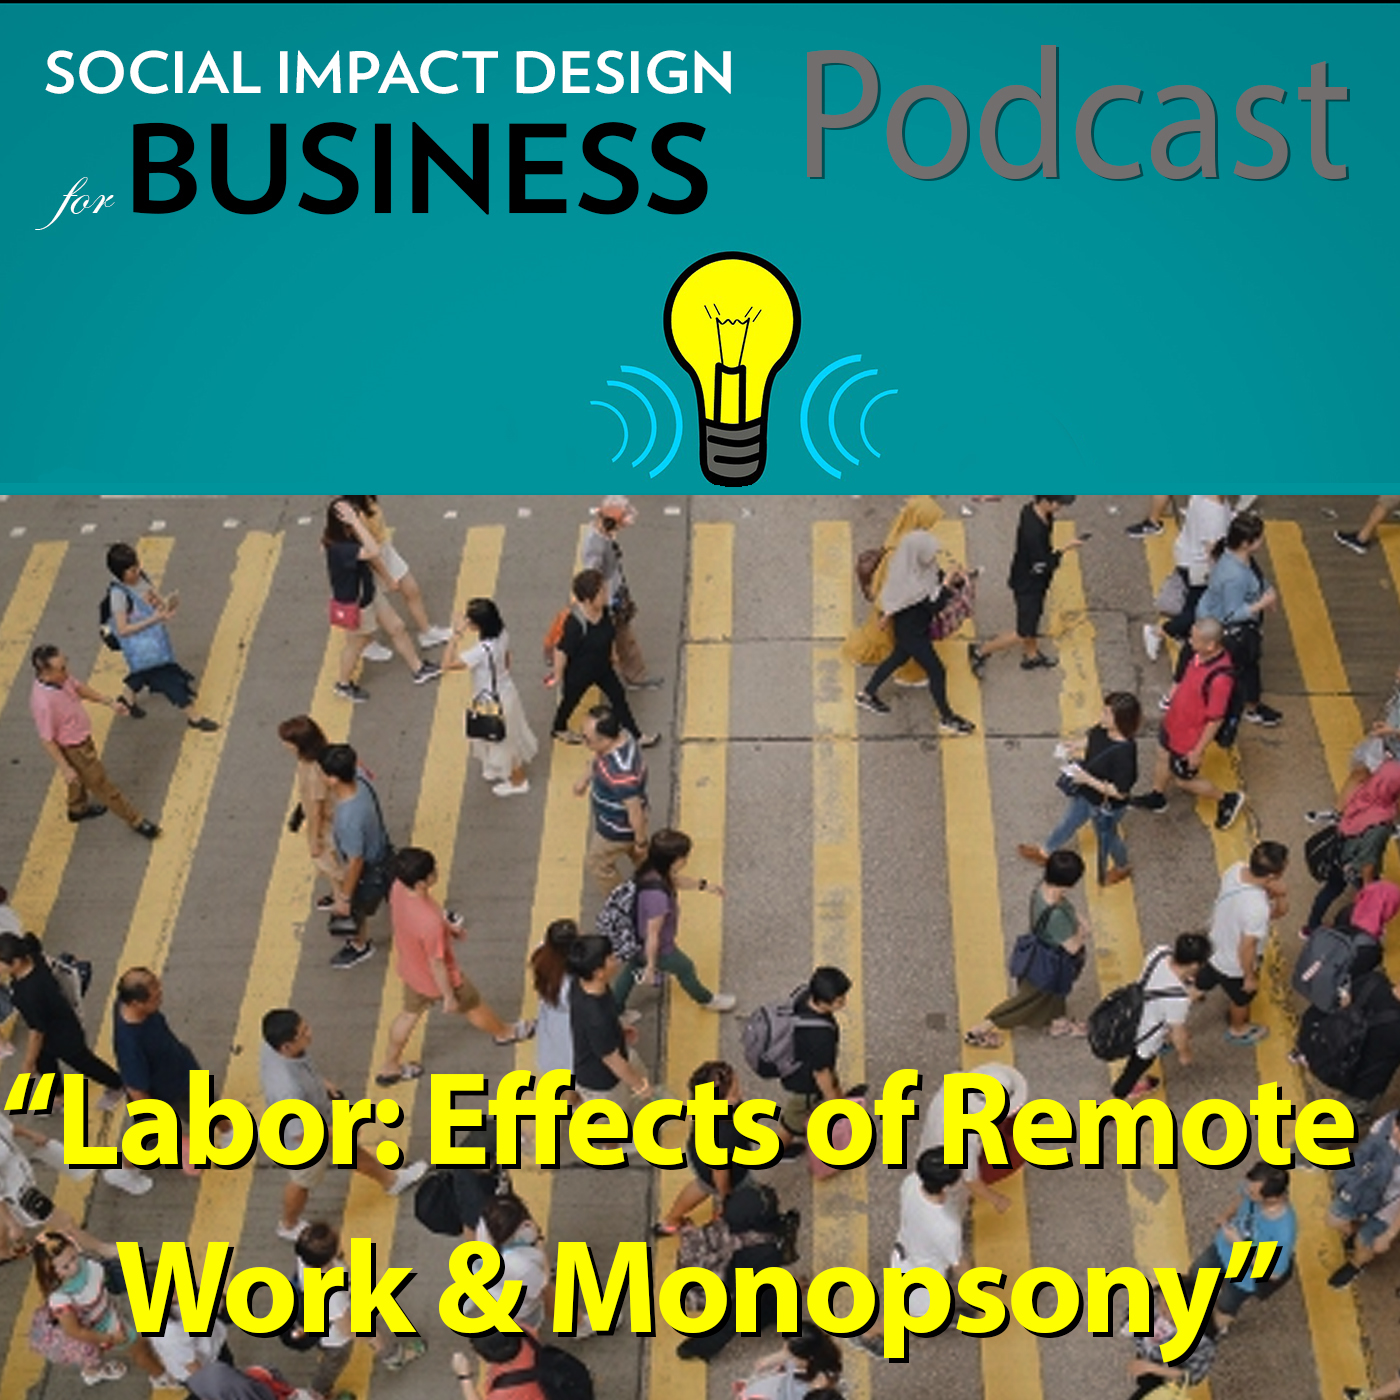 Podcast: Labor – Effects of Remote Work and Monopsony